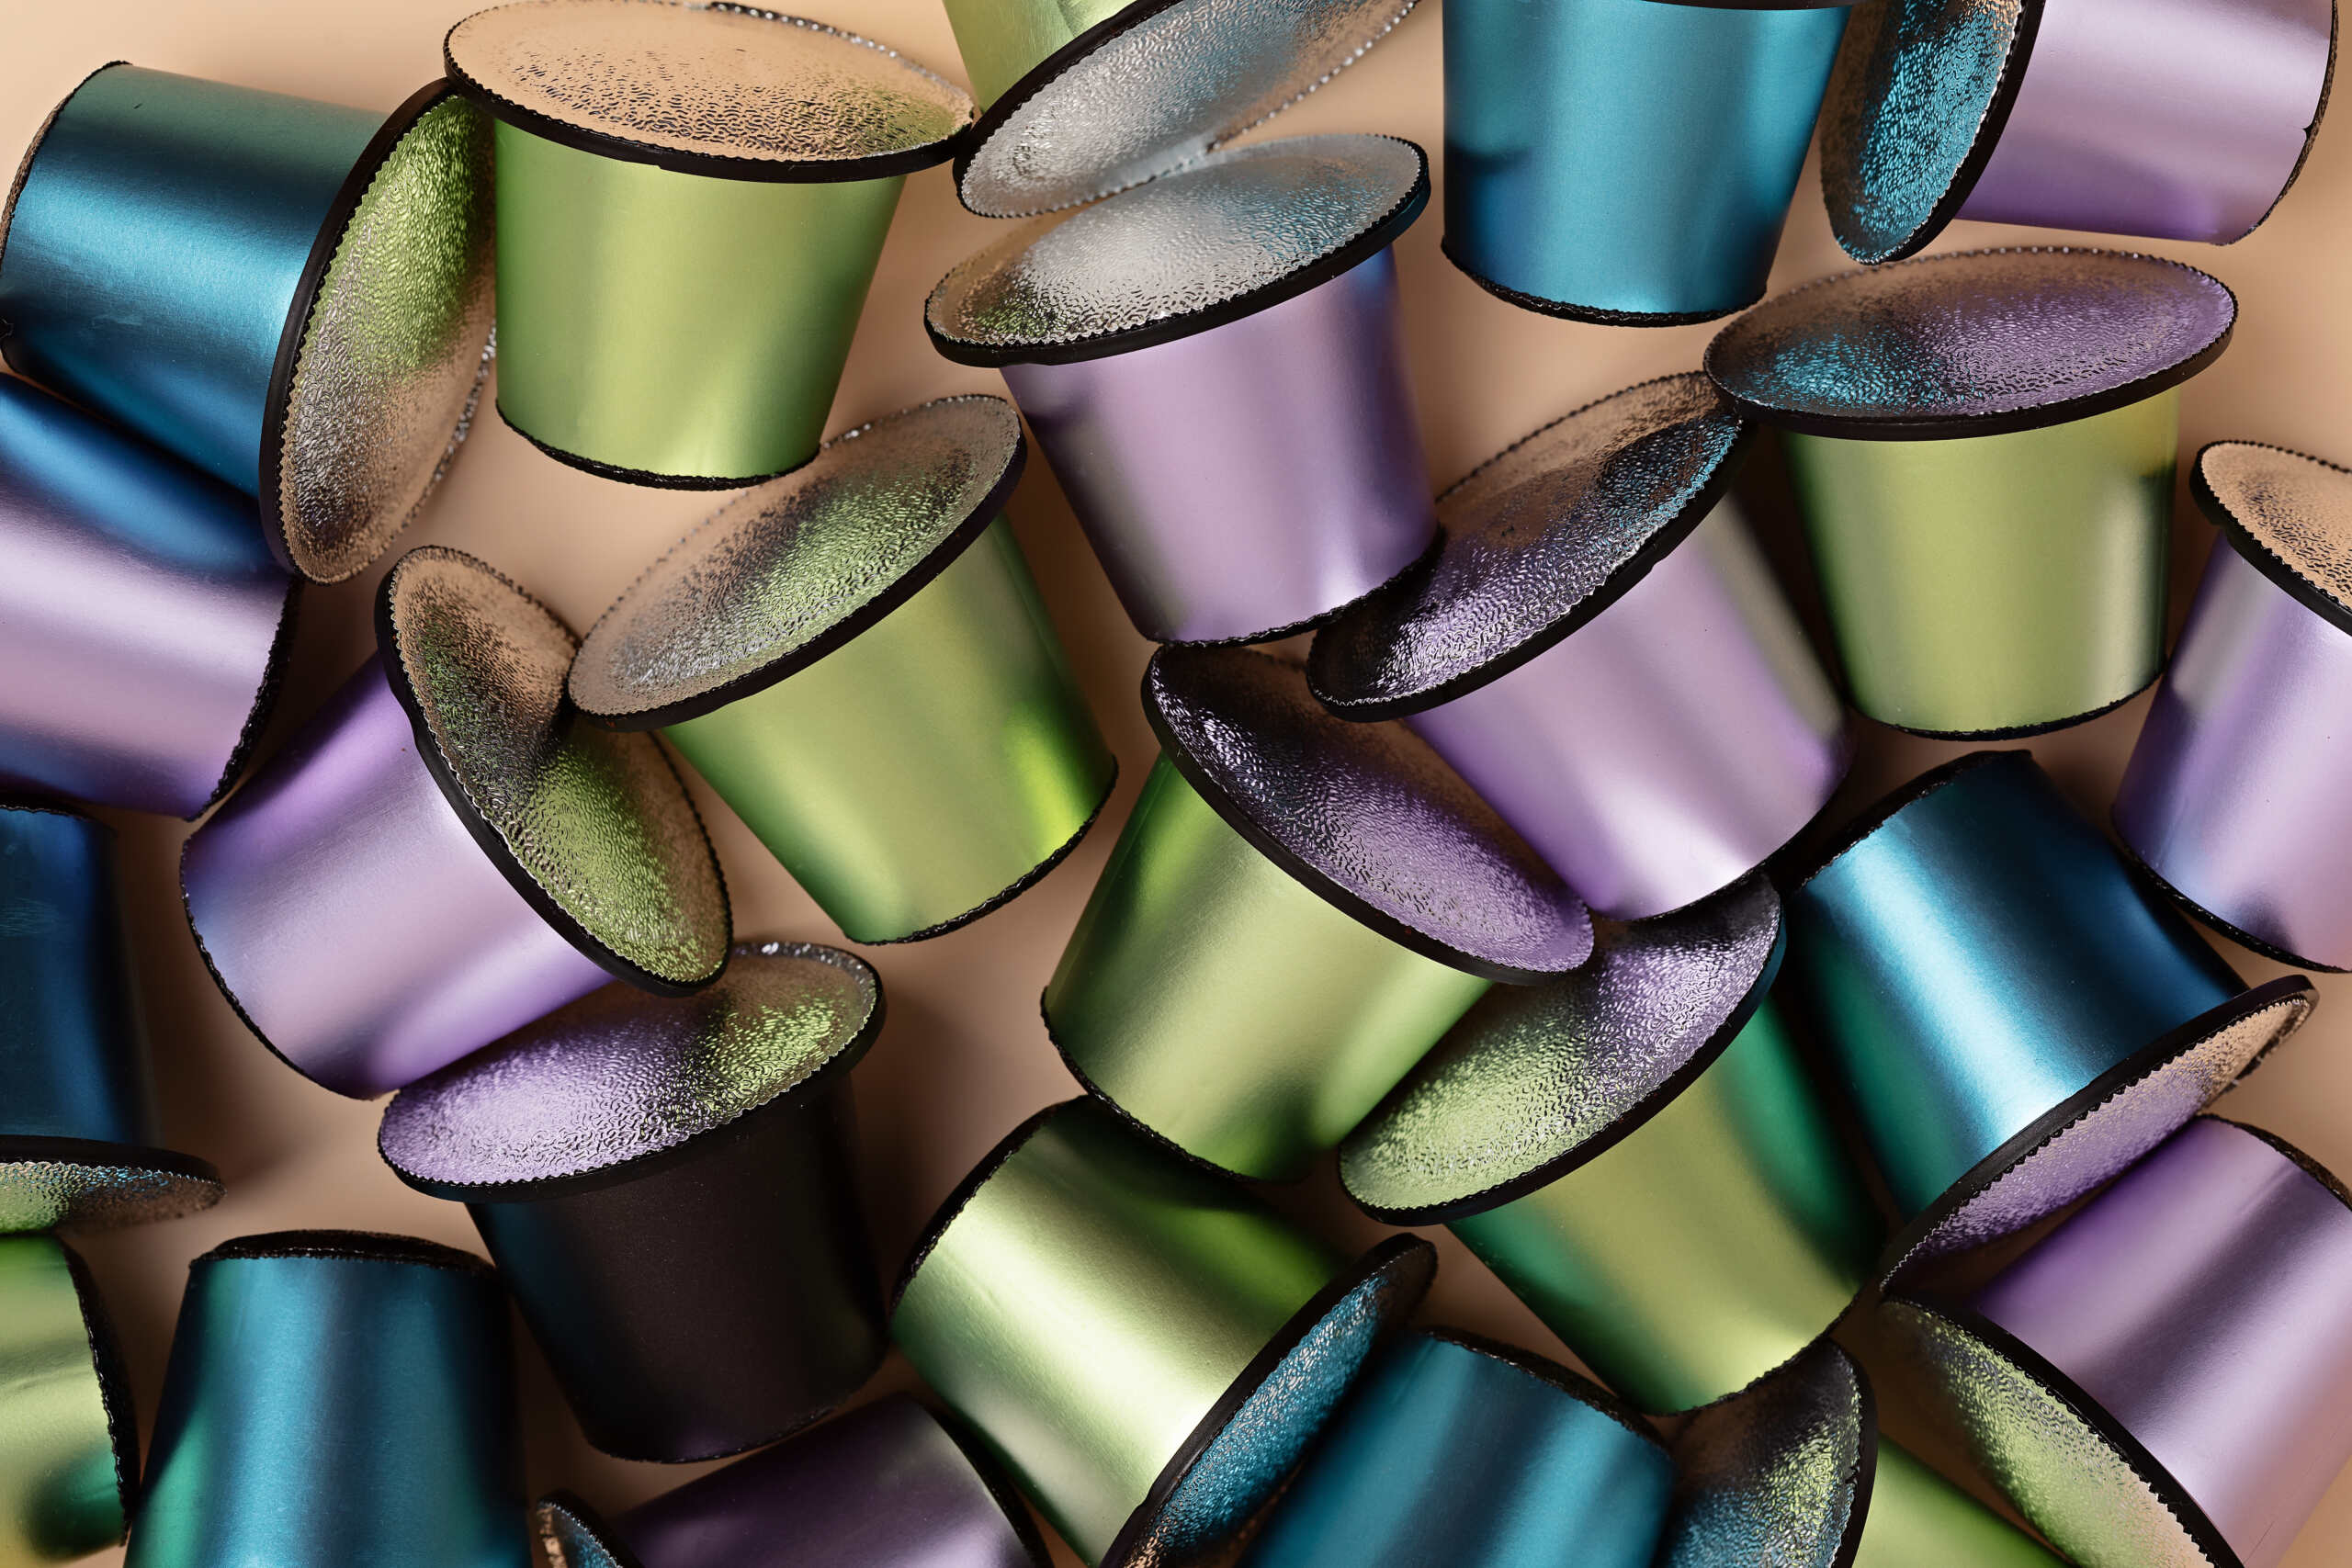 Abstract background of espresso coffee capsules of different colors and flavors.